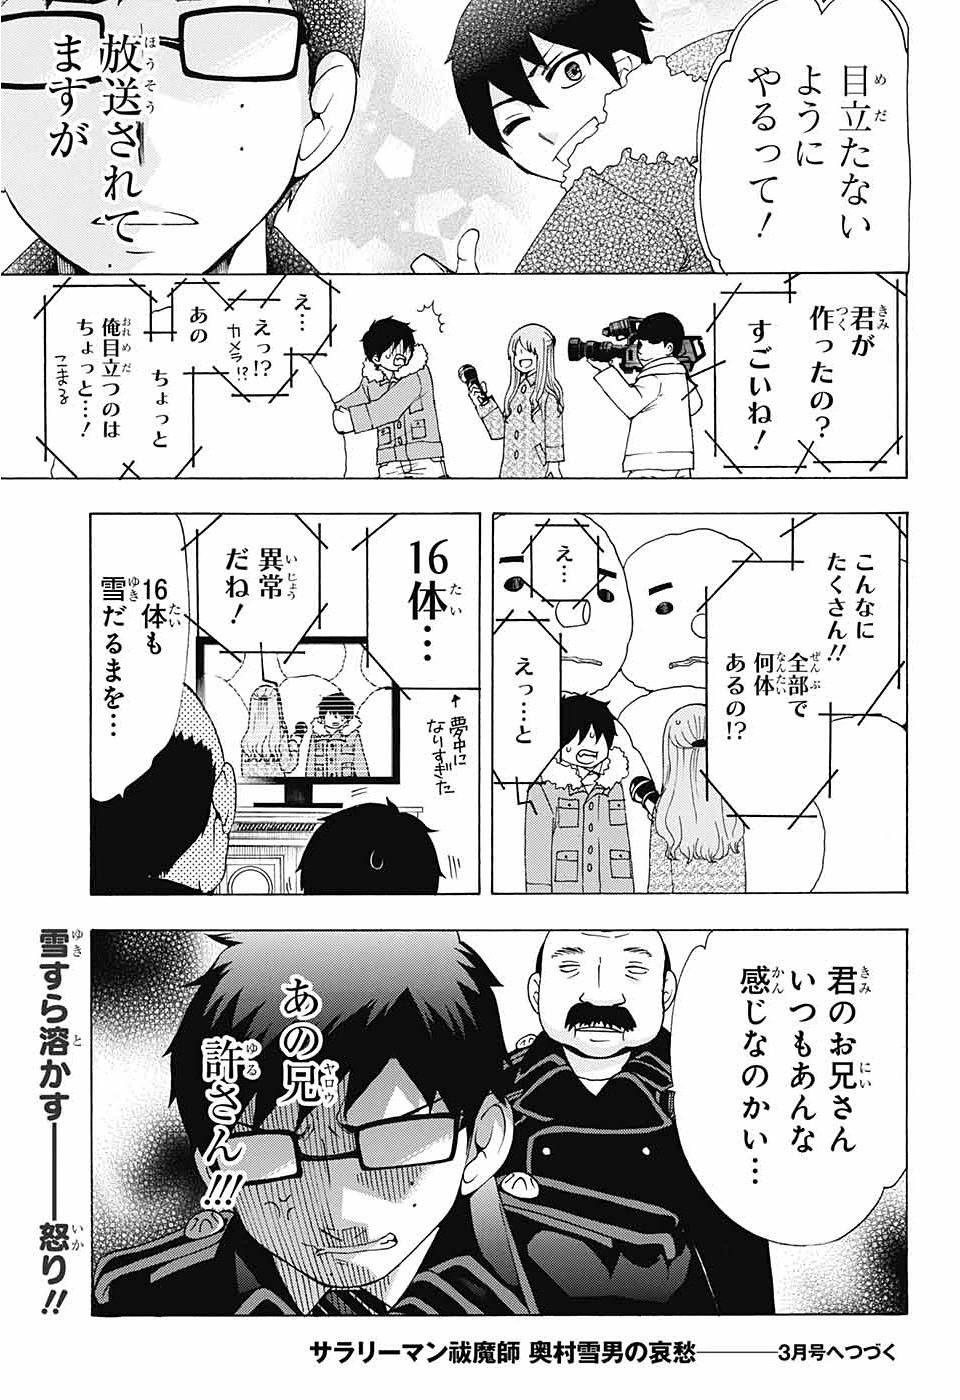 Ao no Exorcist - Chapter 75 - Page 27